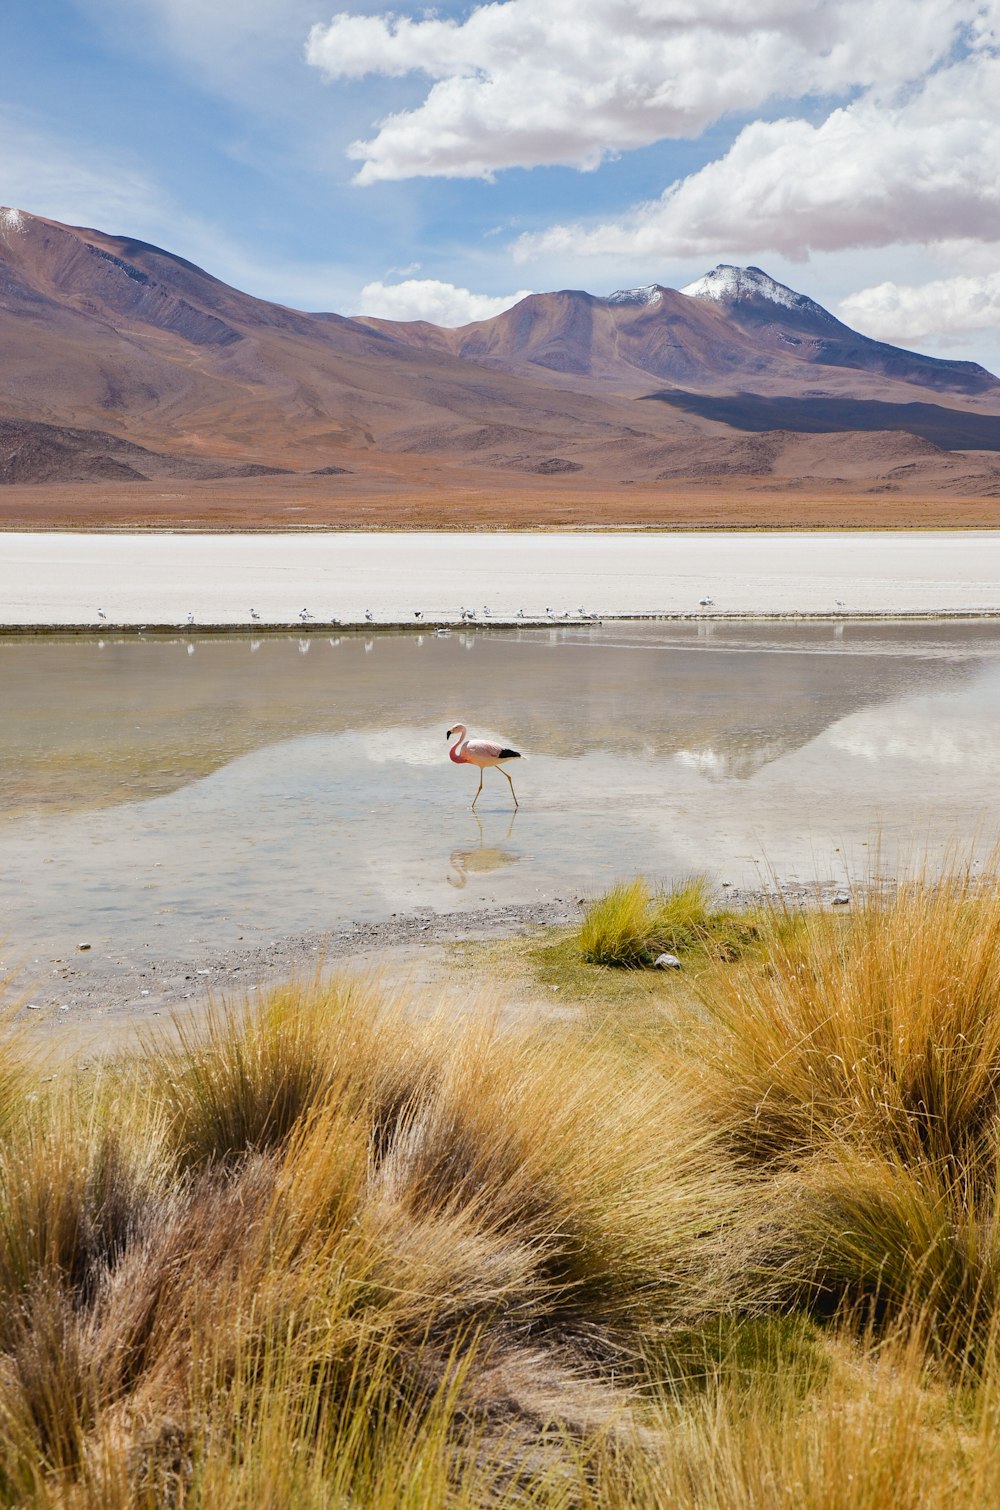 a flamingo standing in shallow water with mountains in the background